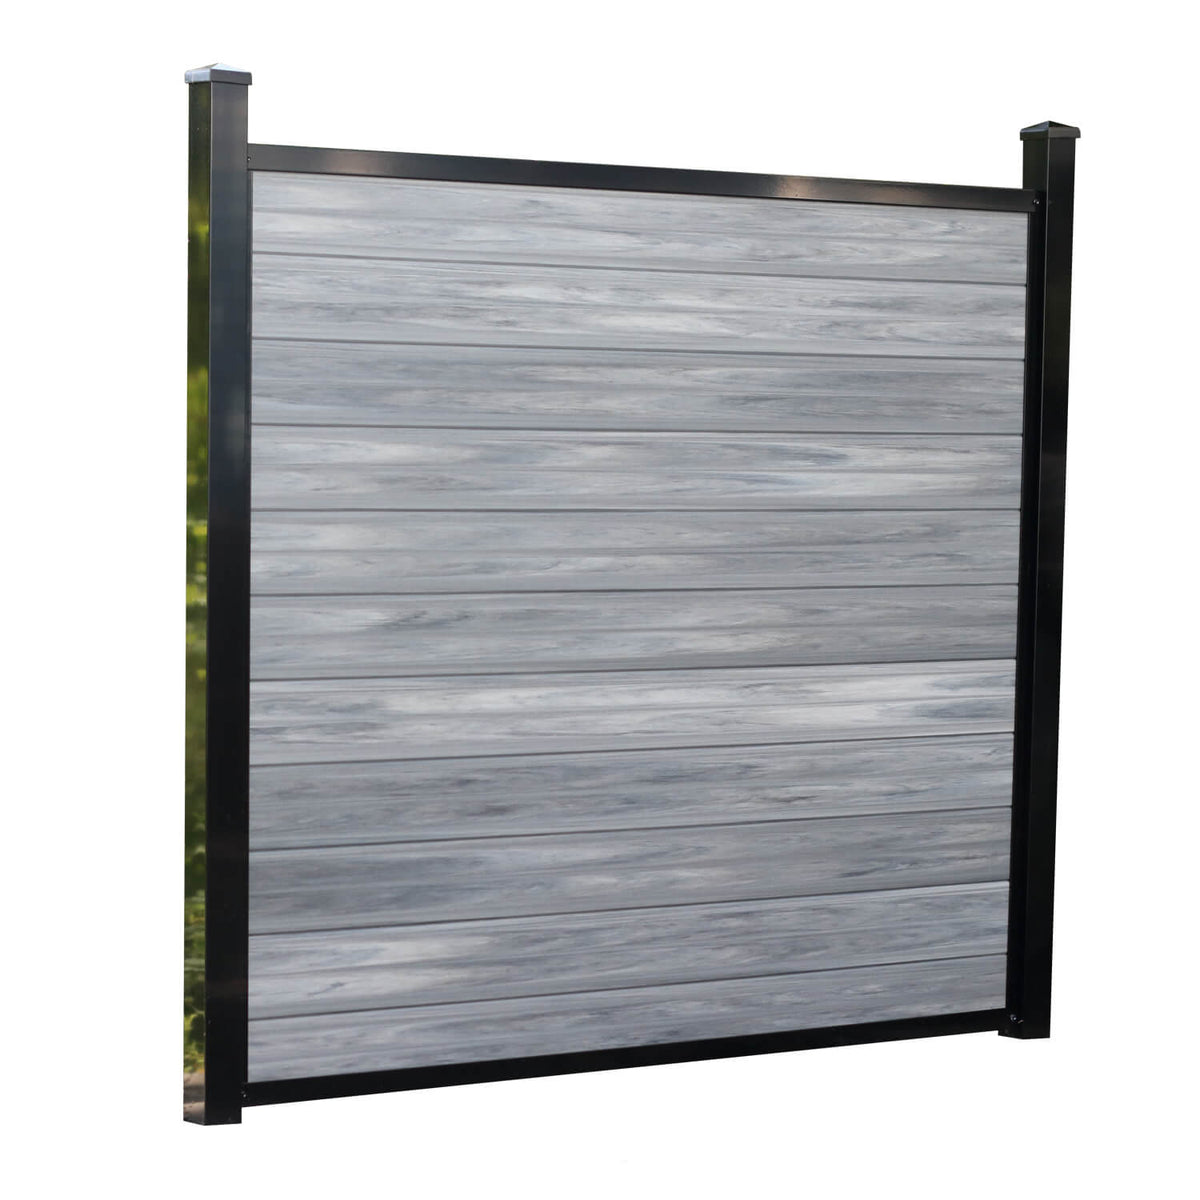 premium fence panel with an aluminum frame and composite fence board, white background